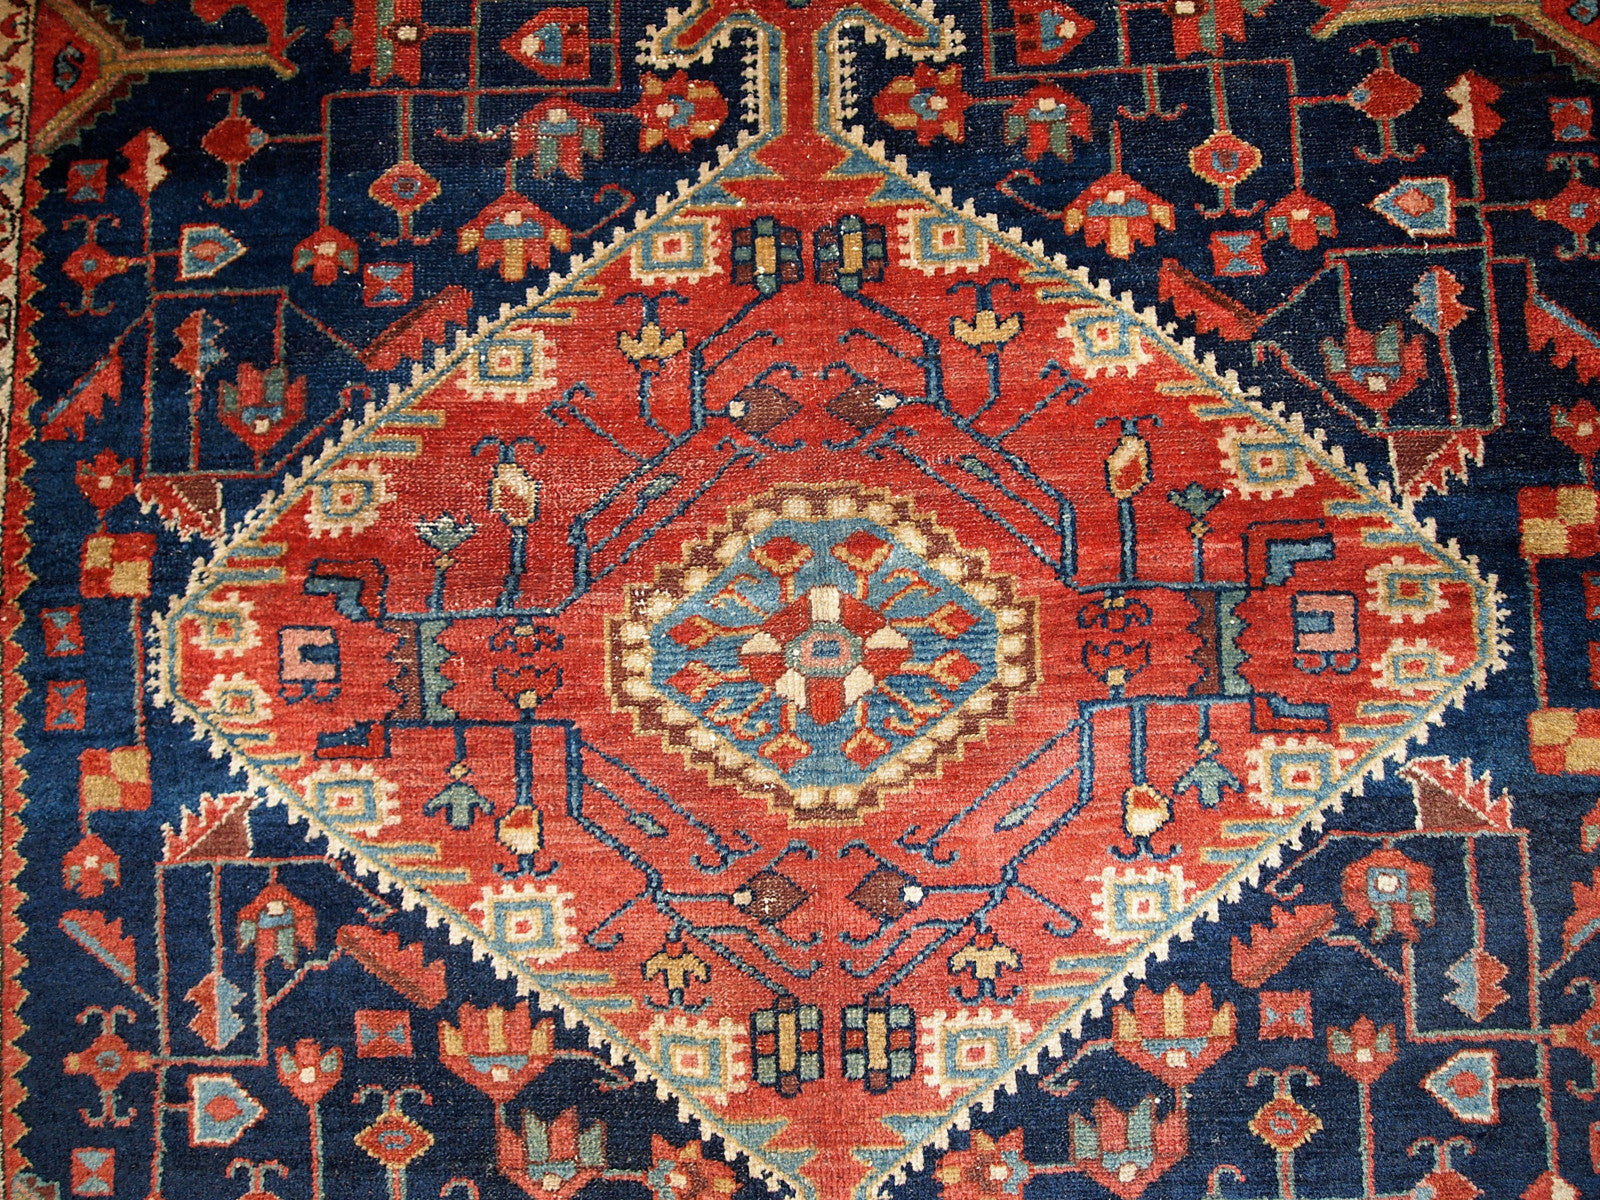 Antique handmade Malayer rug in navy blue and red shades. This rug is in original good condition.